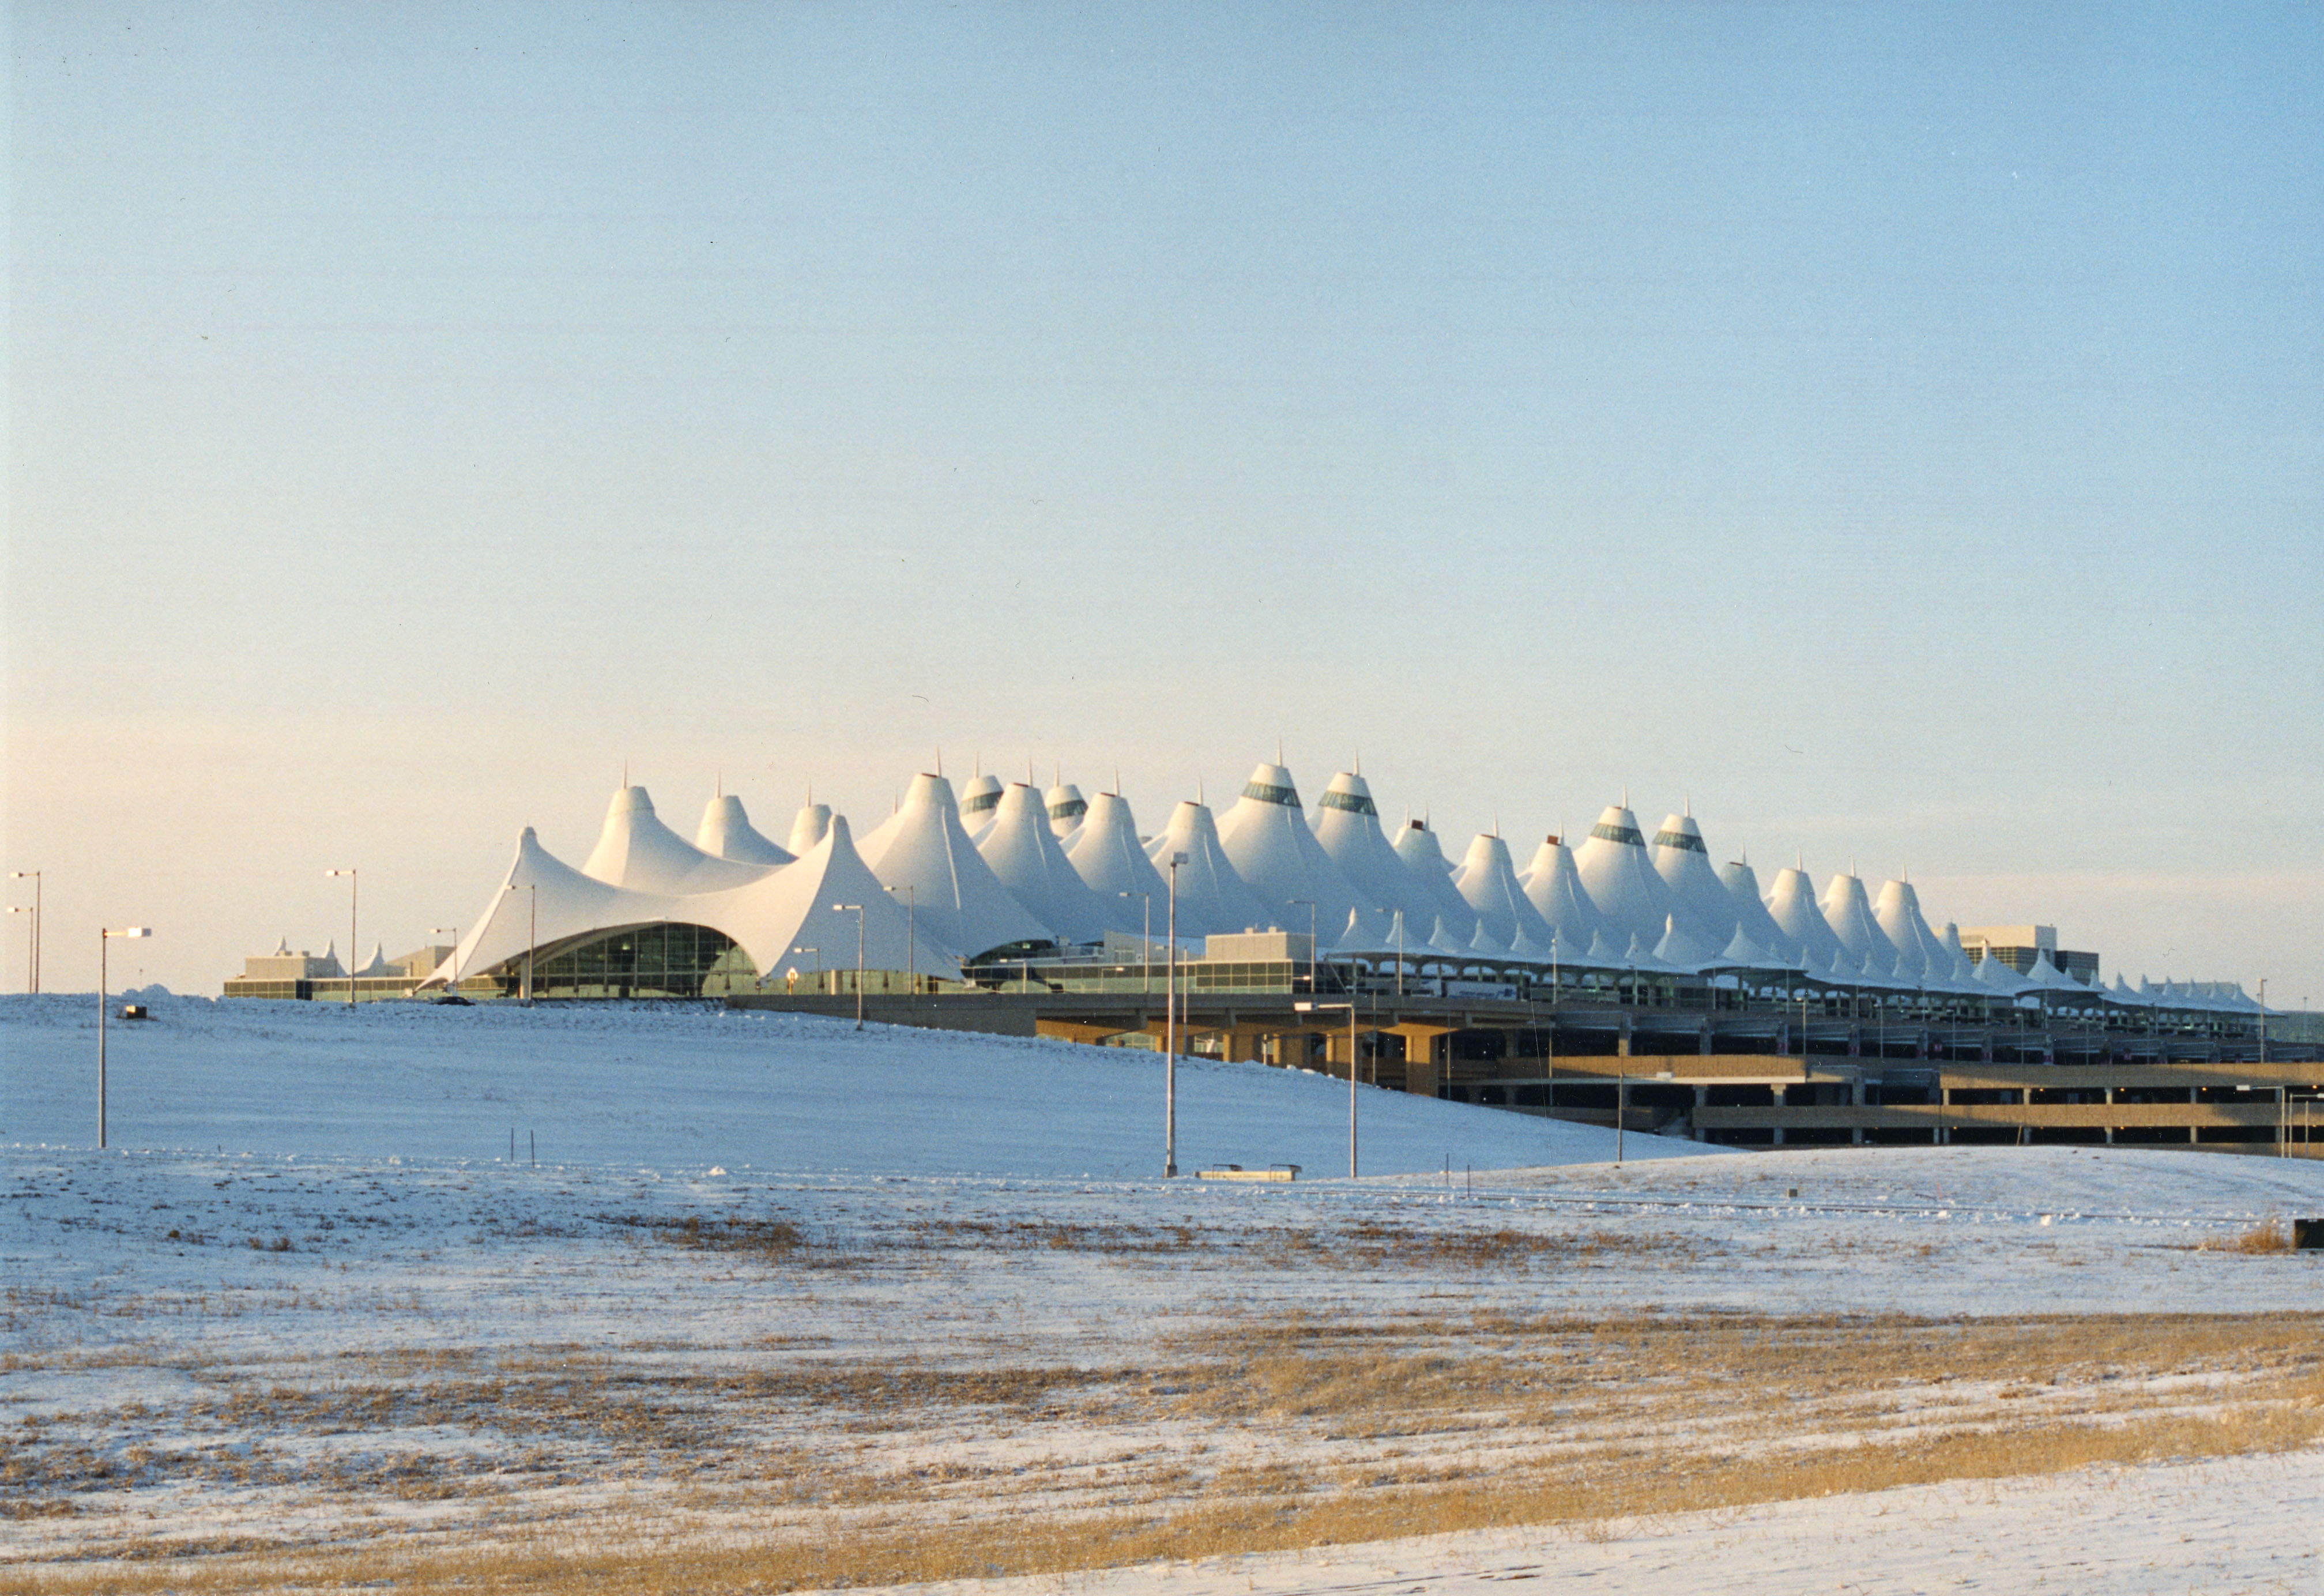 Photo of DIA on a wintry day. There is a thin layer of snow on the ground although the sky is clear and blue. The iconic white tented roof is prominent in this photo.